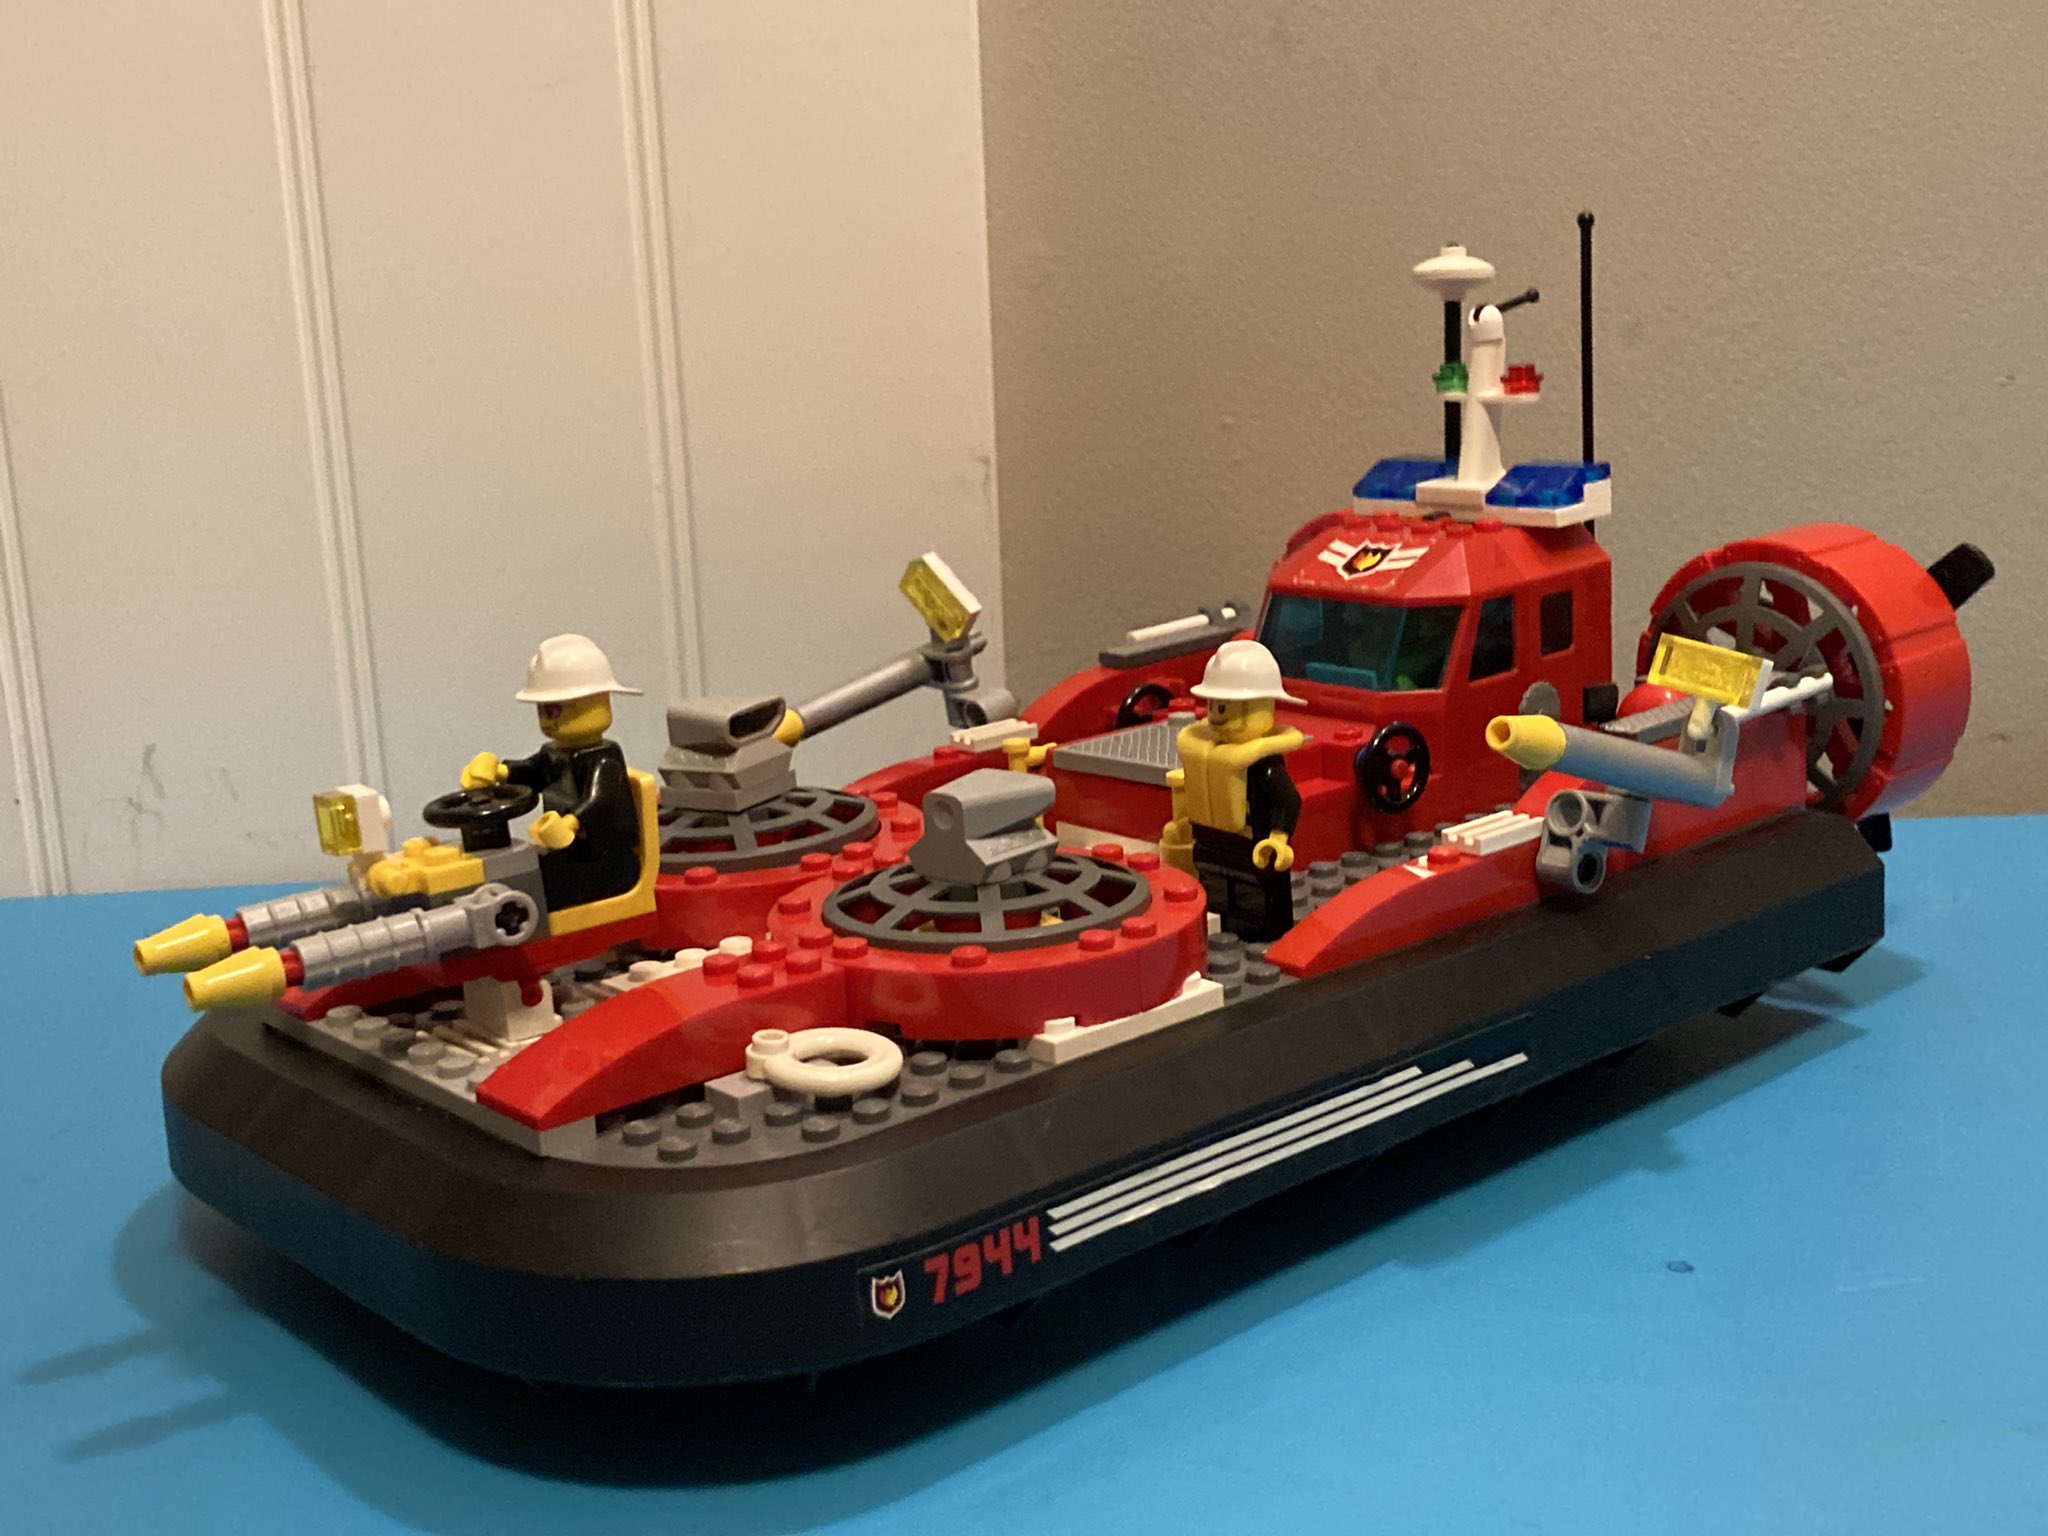 Egnet Paine Gillic buffet TheLegoMasterBuilder on Twitter: "NEW Update: I've added the LEGO City Fire  Hovercraft 7944. I've been dreaming to get this set since my childhood. And  now it came true. And speaking of this